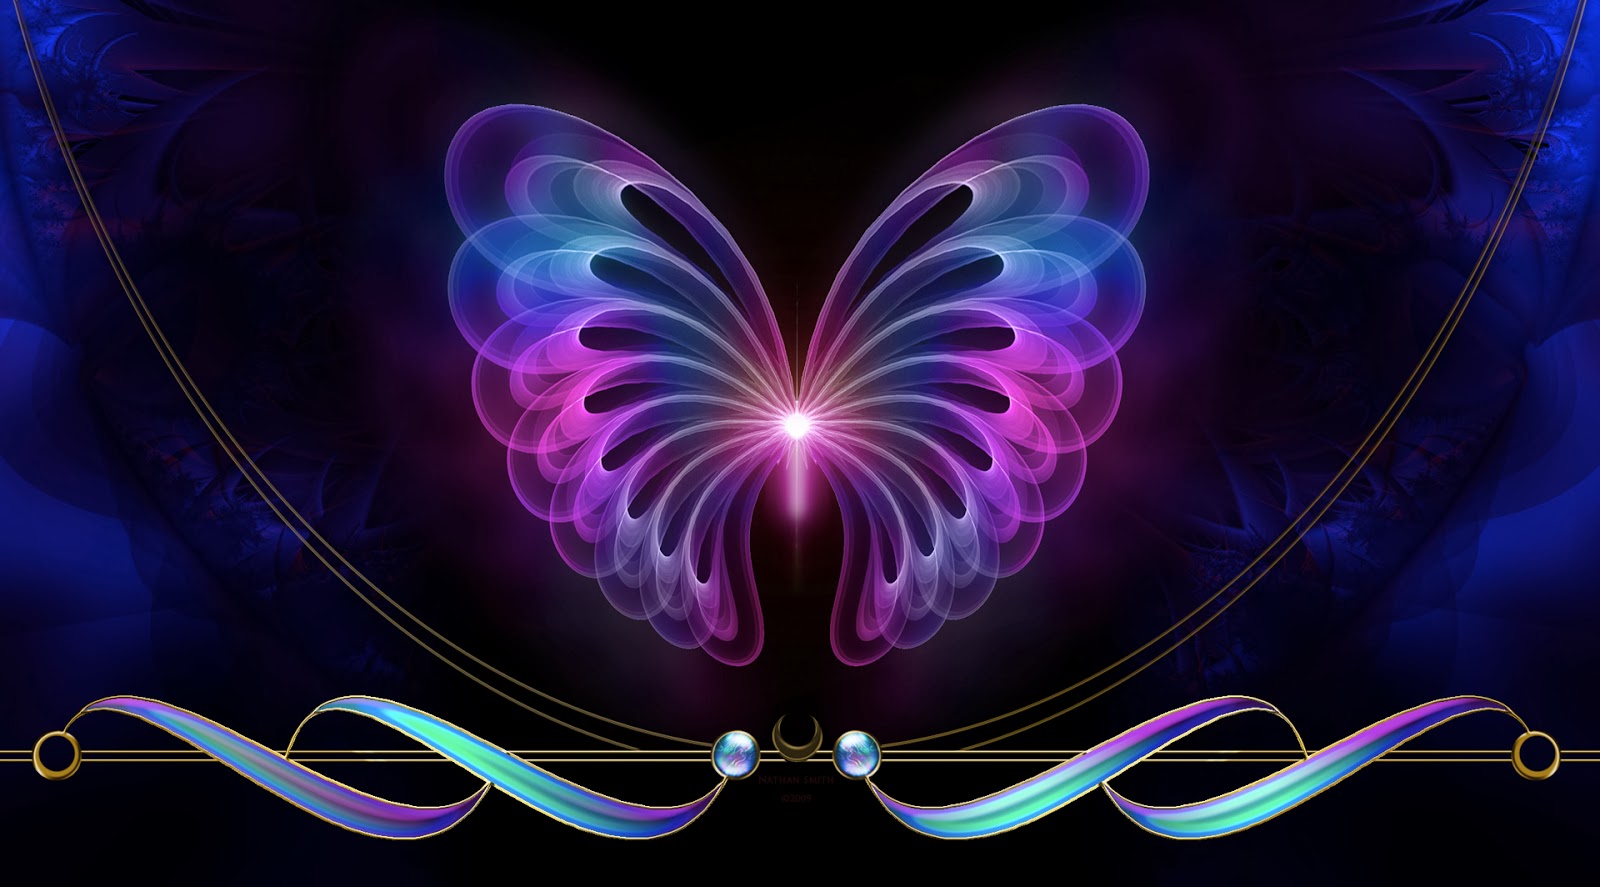 Image Abstract Butterflies Desktop Wallpaper Pc Android